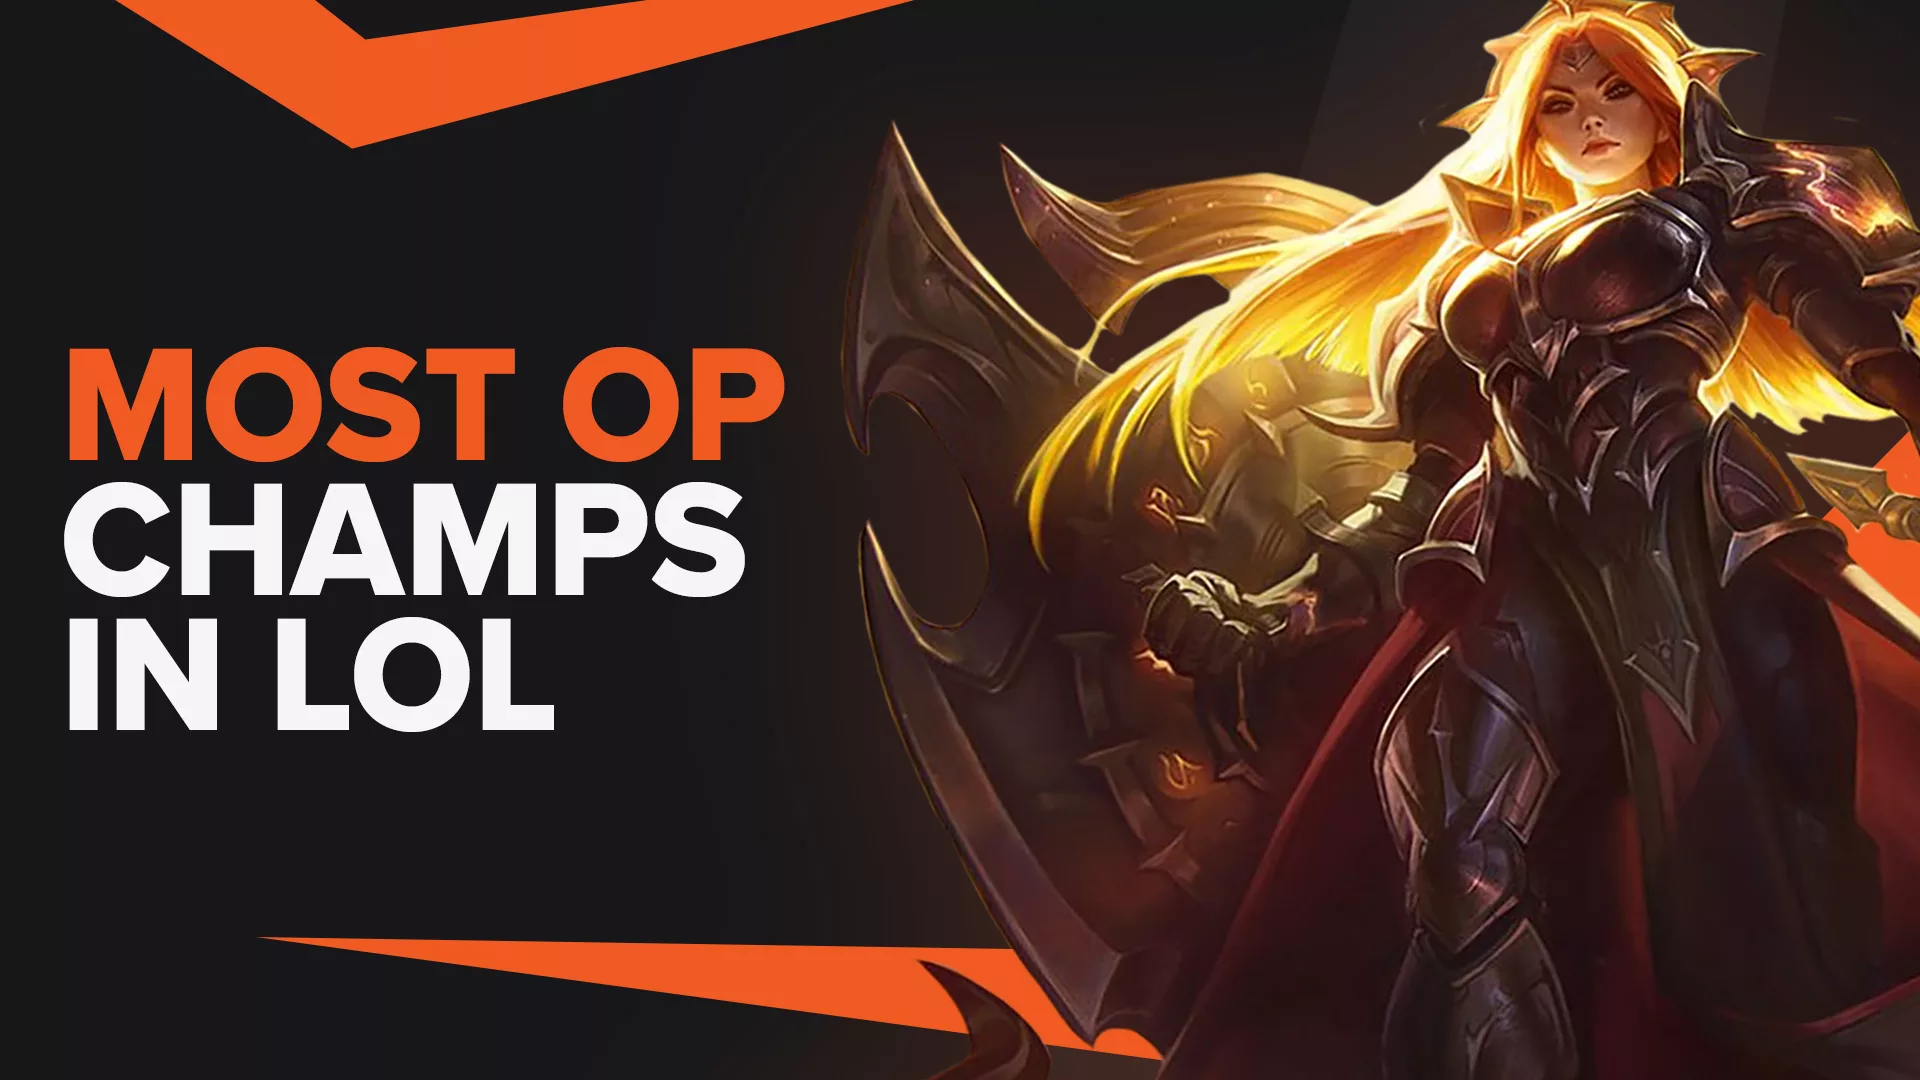 The most OP Champions in League of Legends